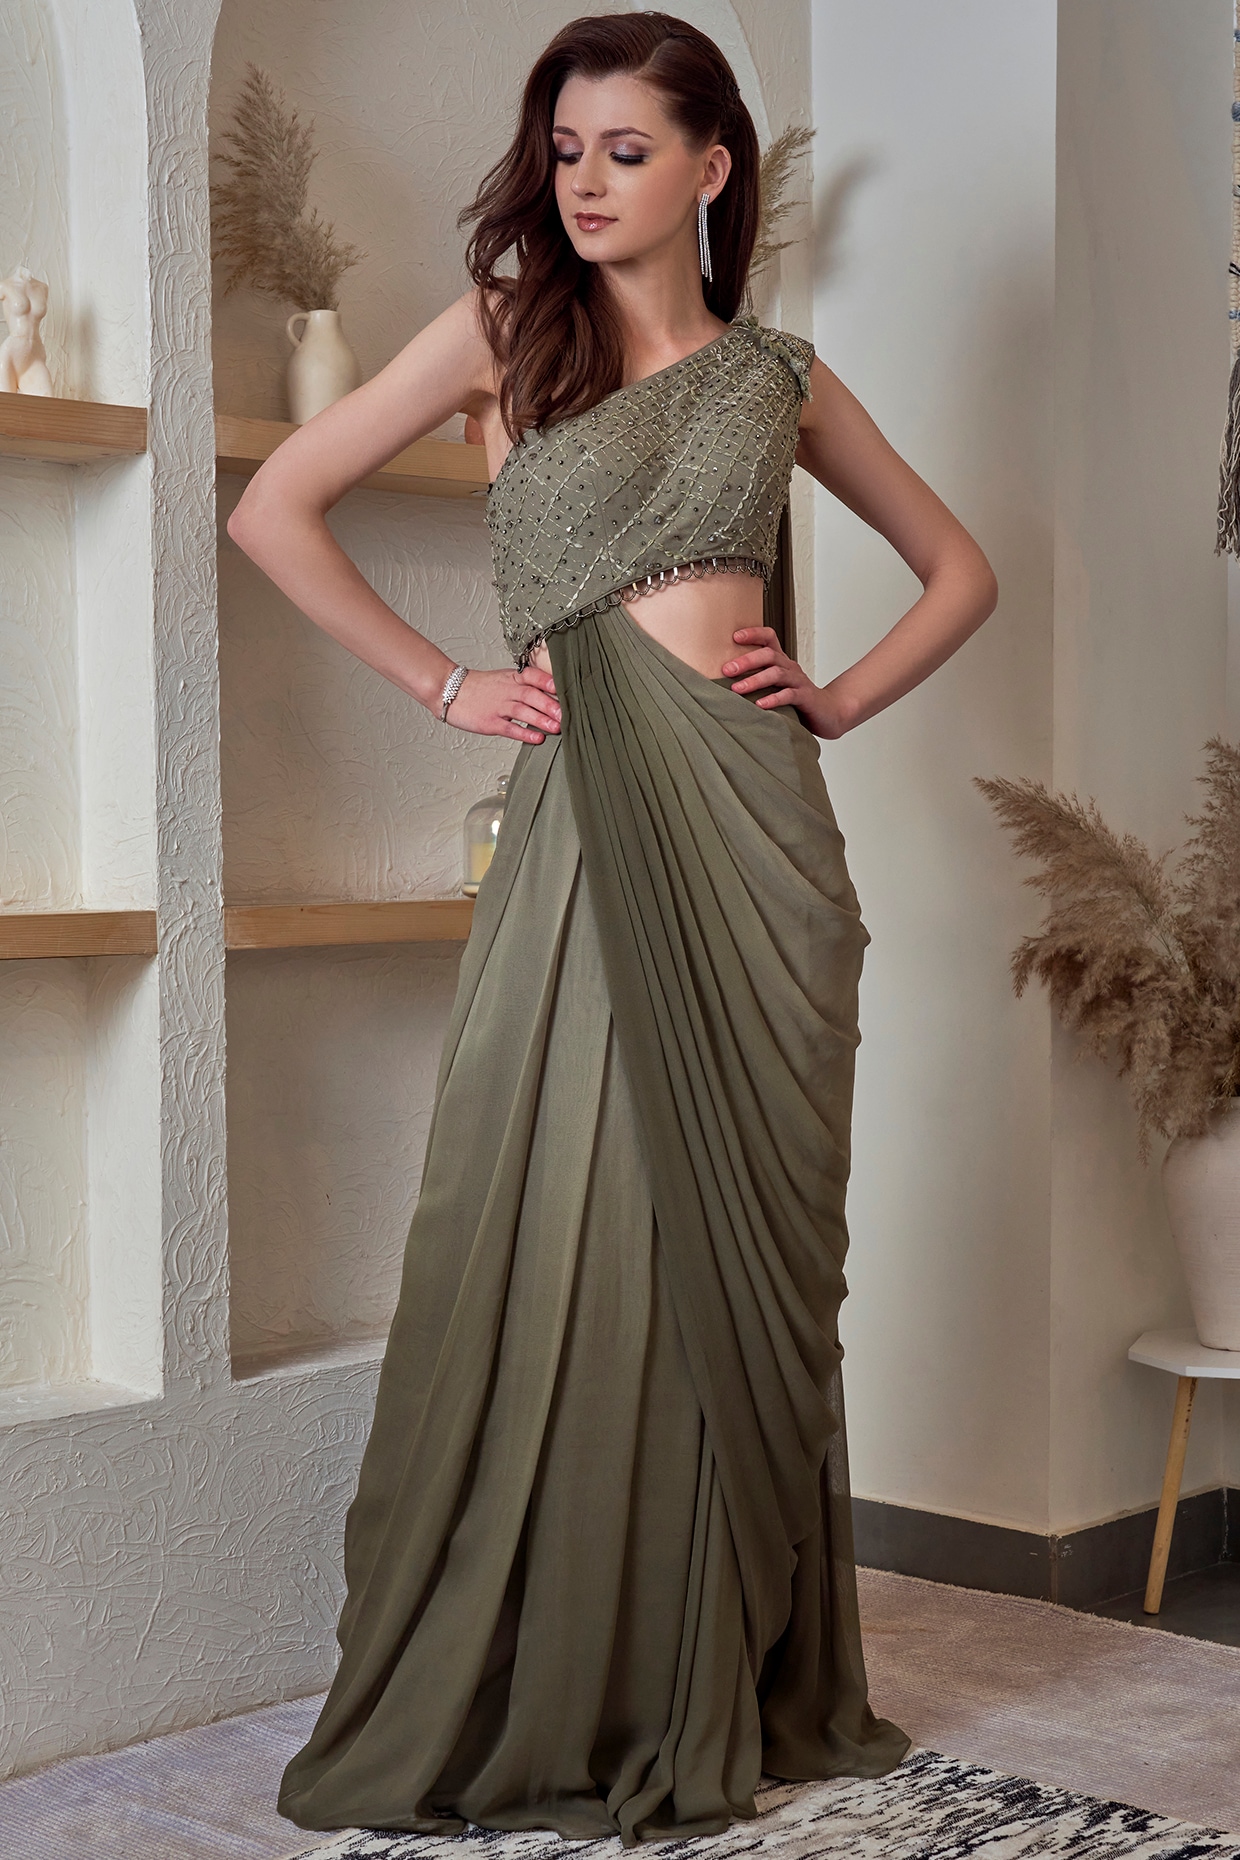 Long Dresses made out of old and Damaged Sarees #LongDresses | Long gown  dress, Silk dress design, Indian gowns dresses